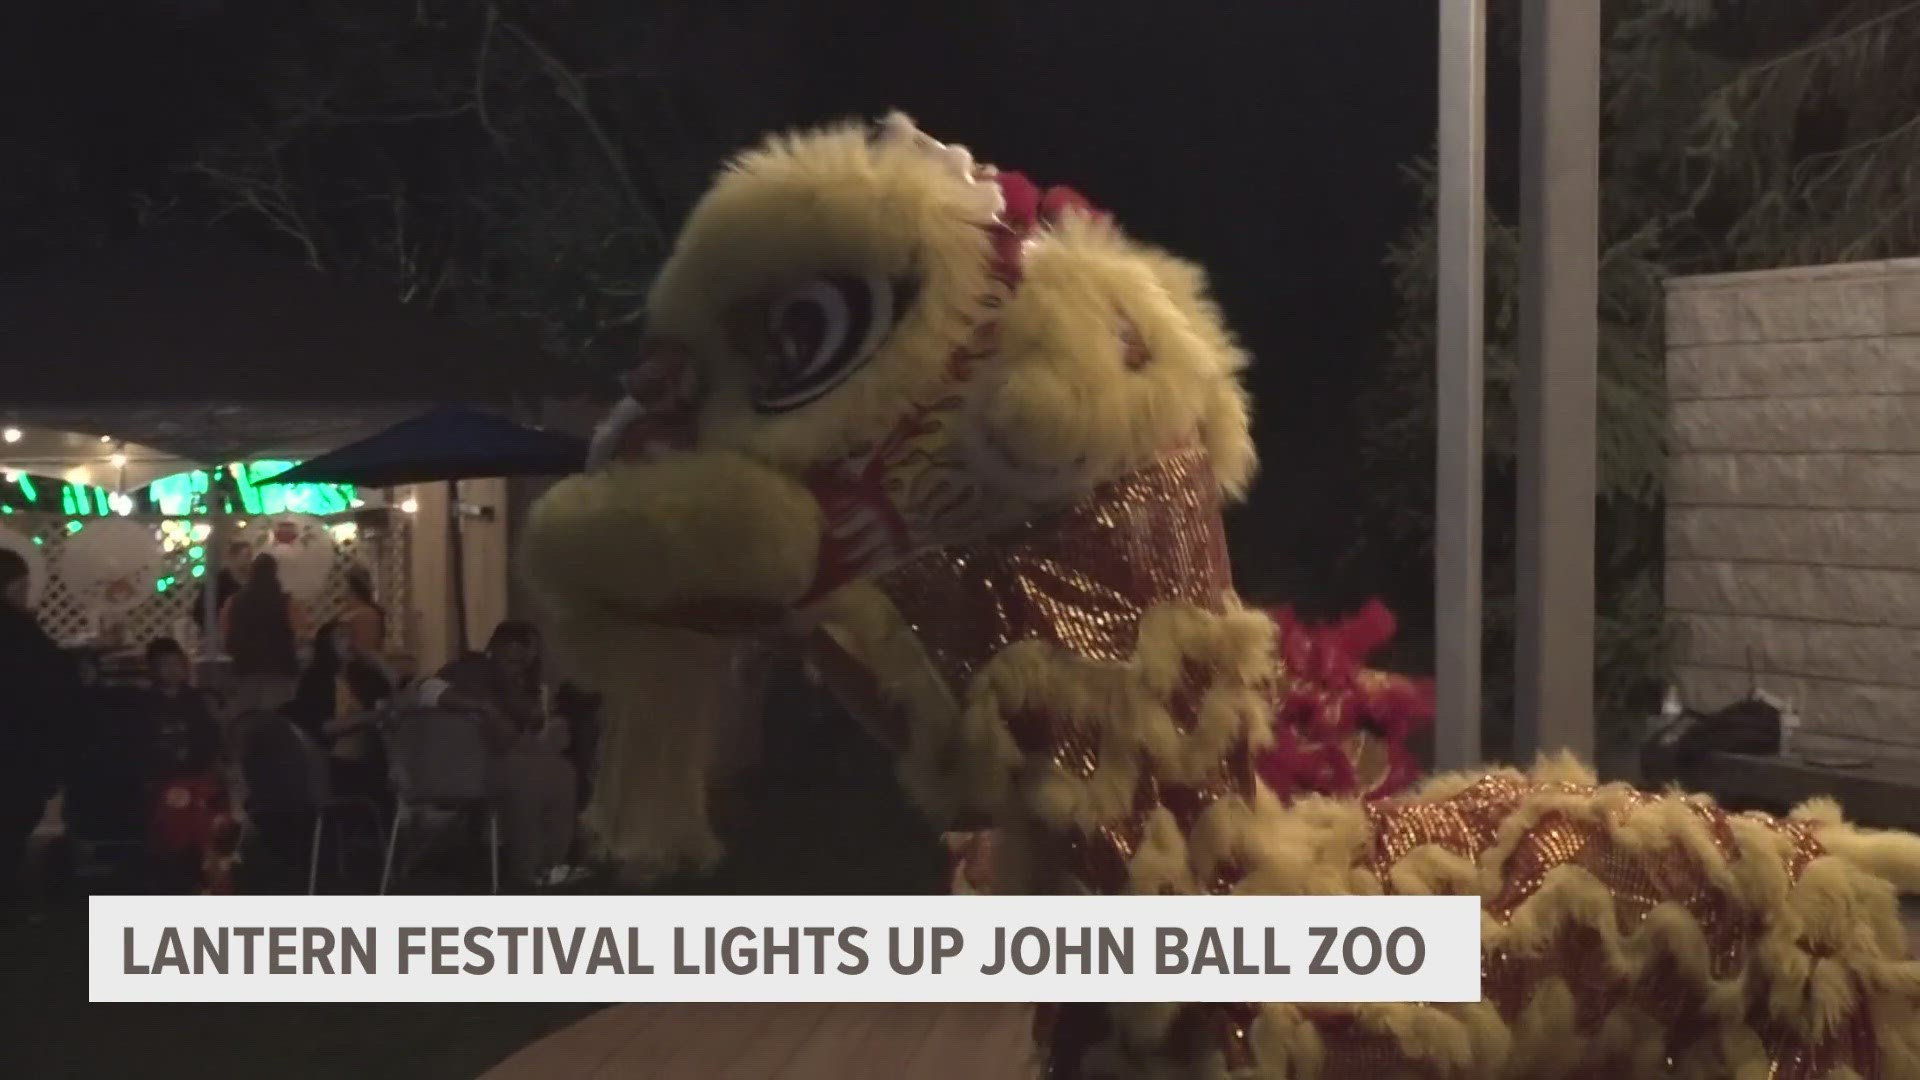 The festival is a 10-week celebration of Asian culture and conservation, bringing intricate lanterns to the zoo.